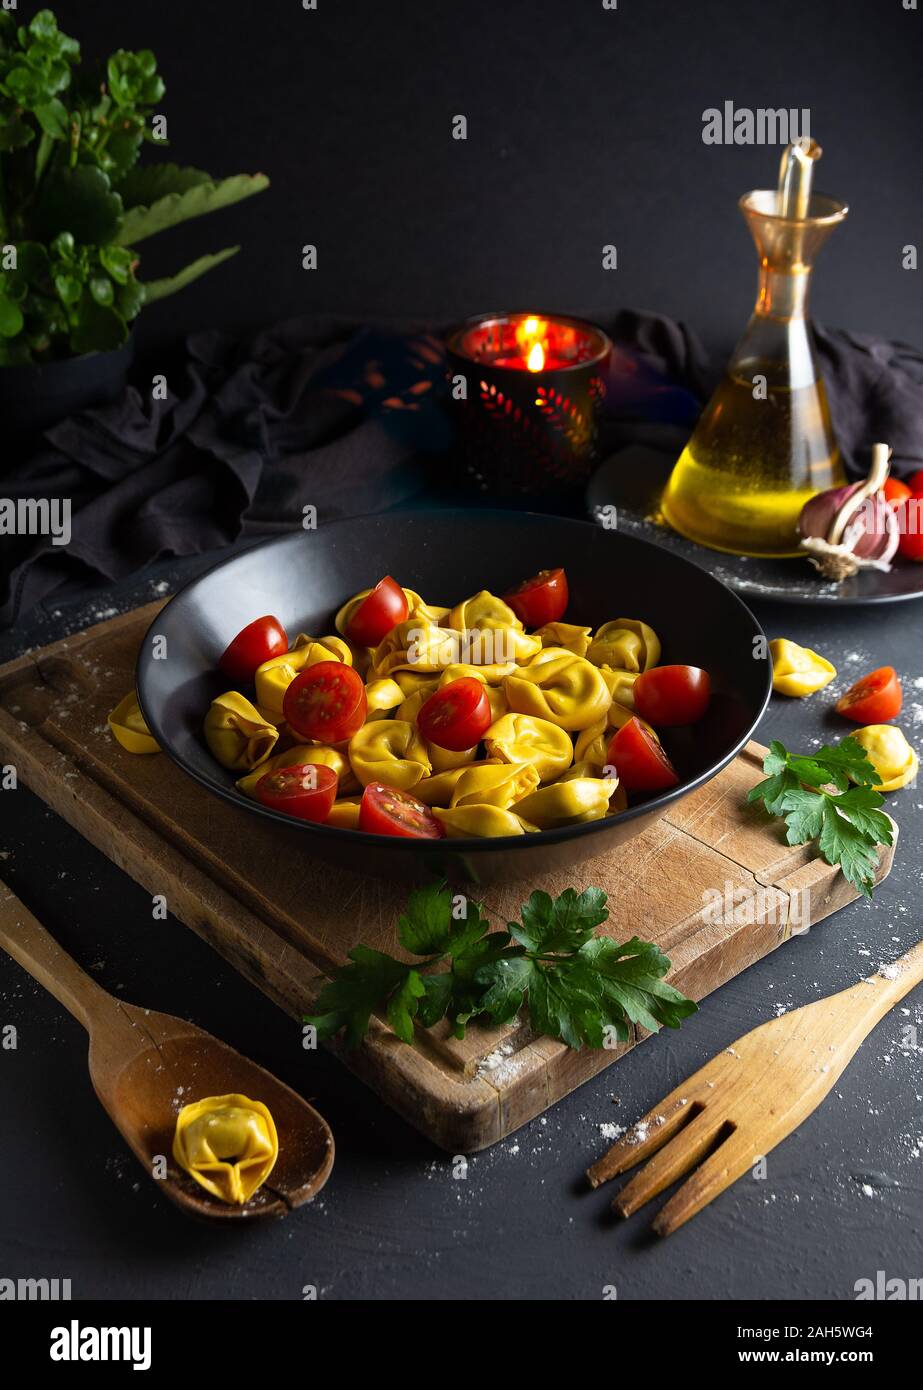 Ravioli with tomatoes on black plate in rustic homemade food environment, aerial view, dark food Stock Photo